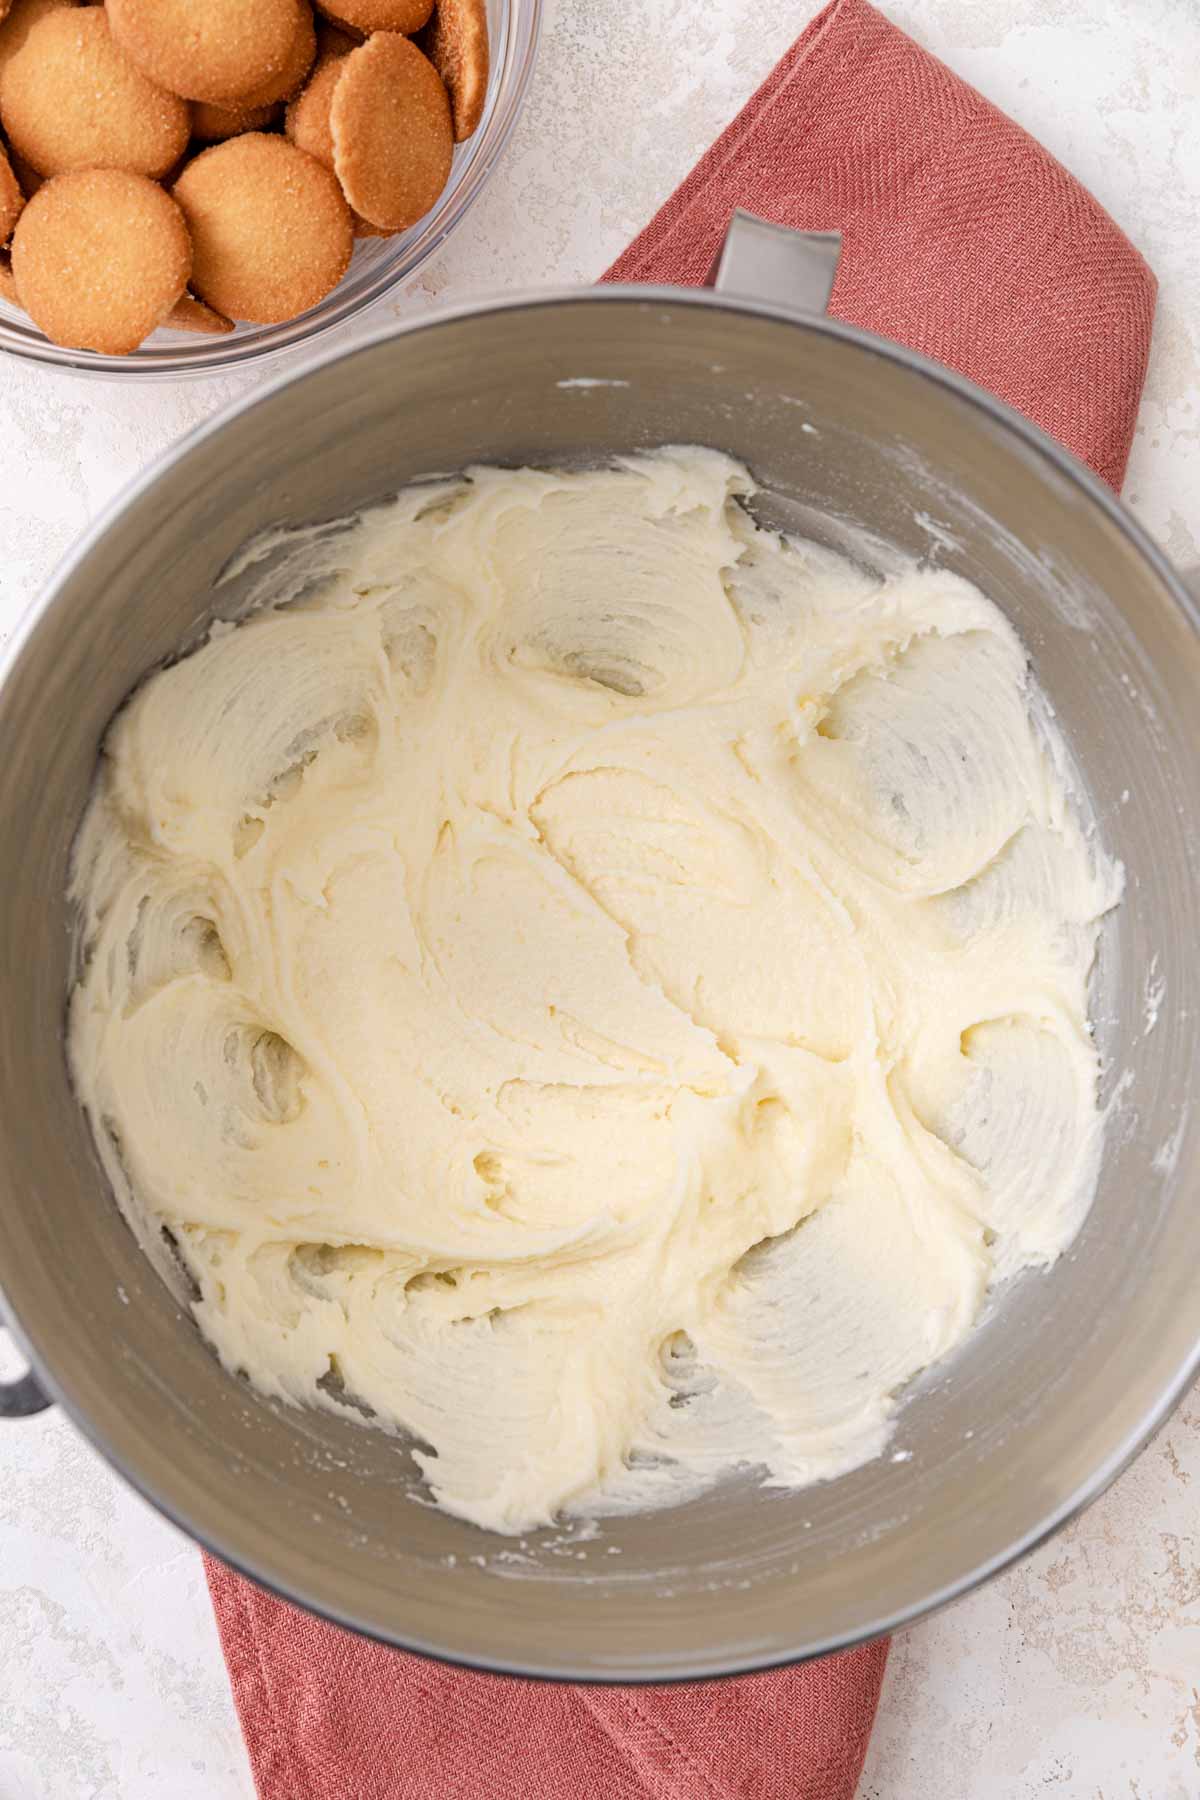 Banana Pudding Cake Frosting Being Mixed